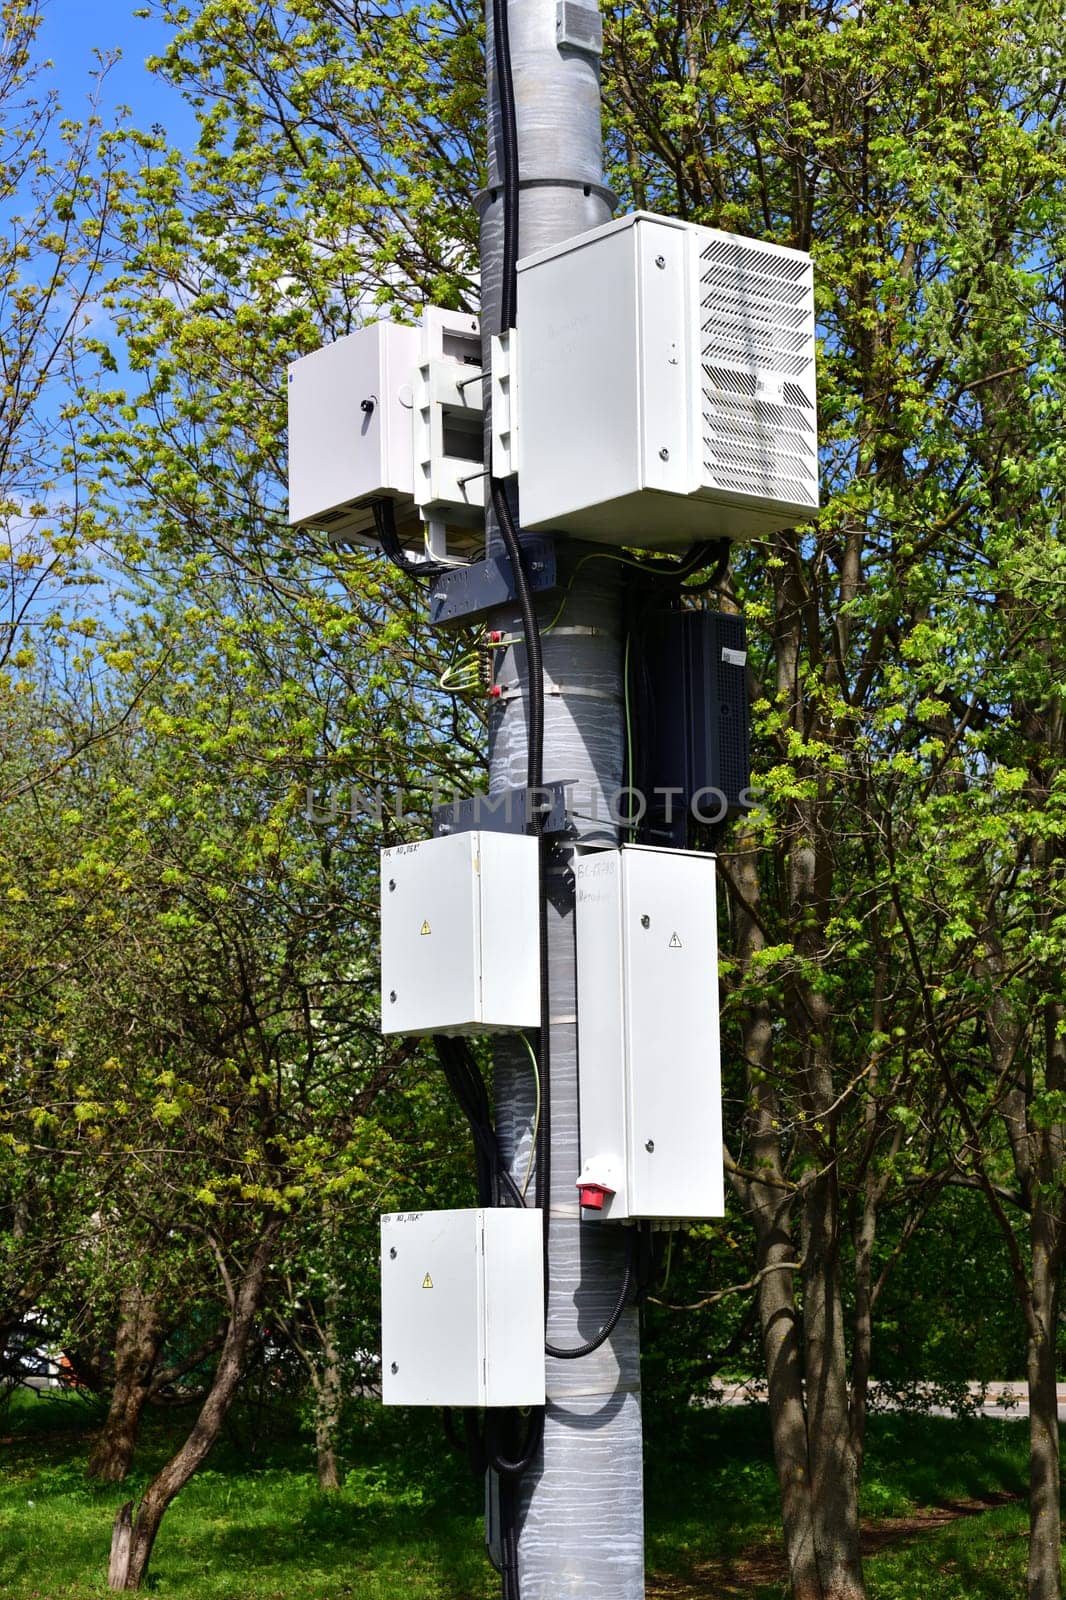 Moscow, Russia - May 14. 2021. Base stations for cellular networks on pole